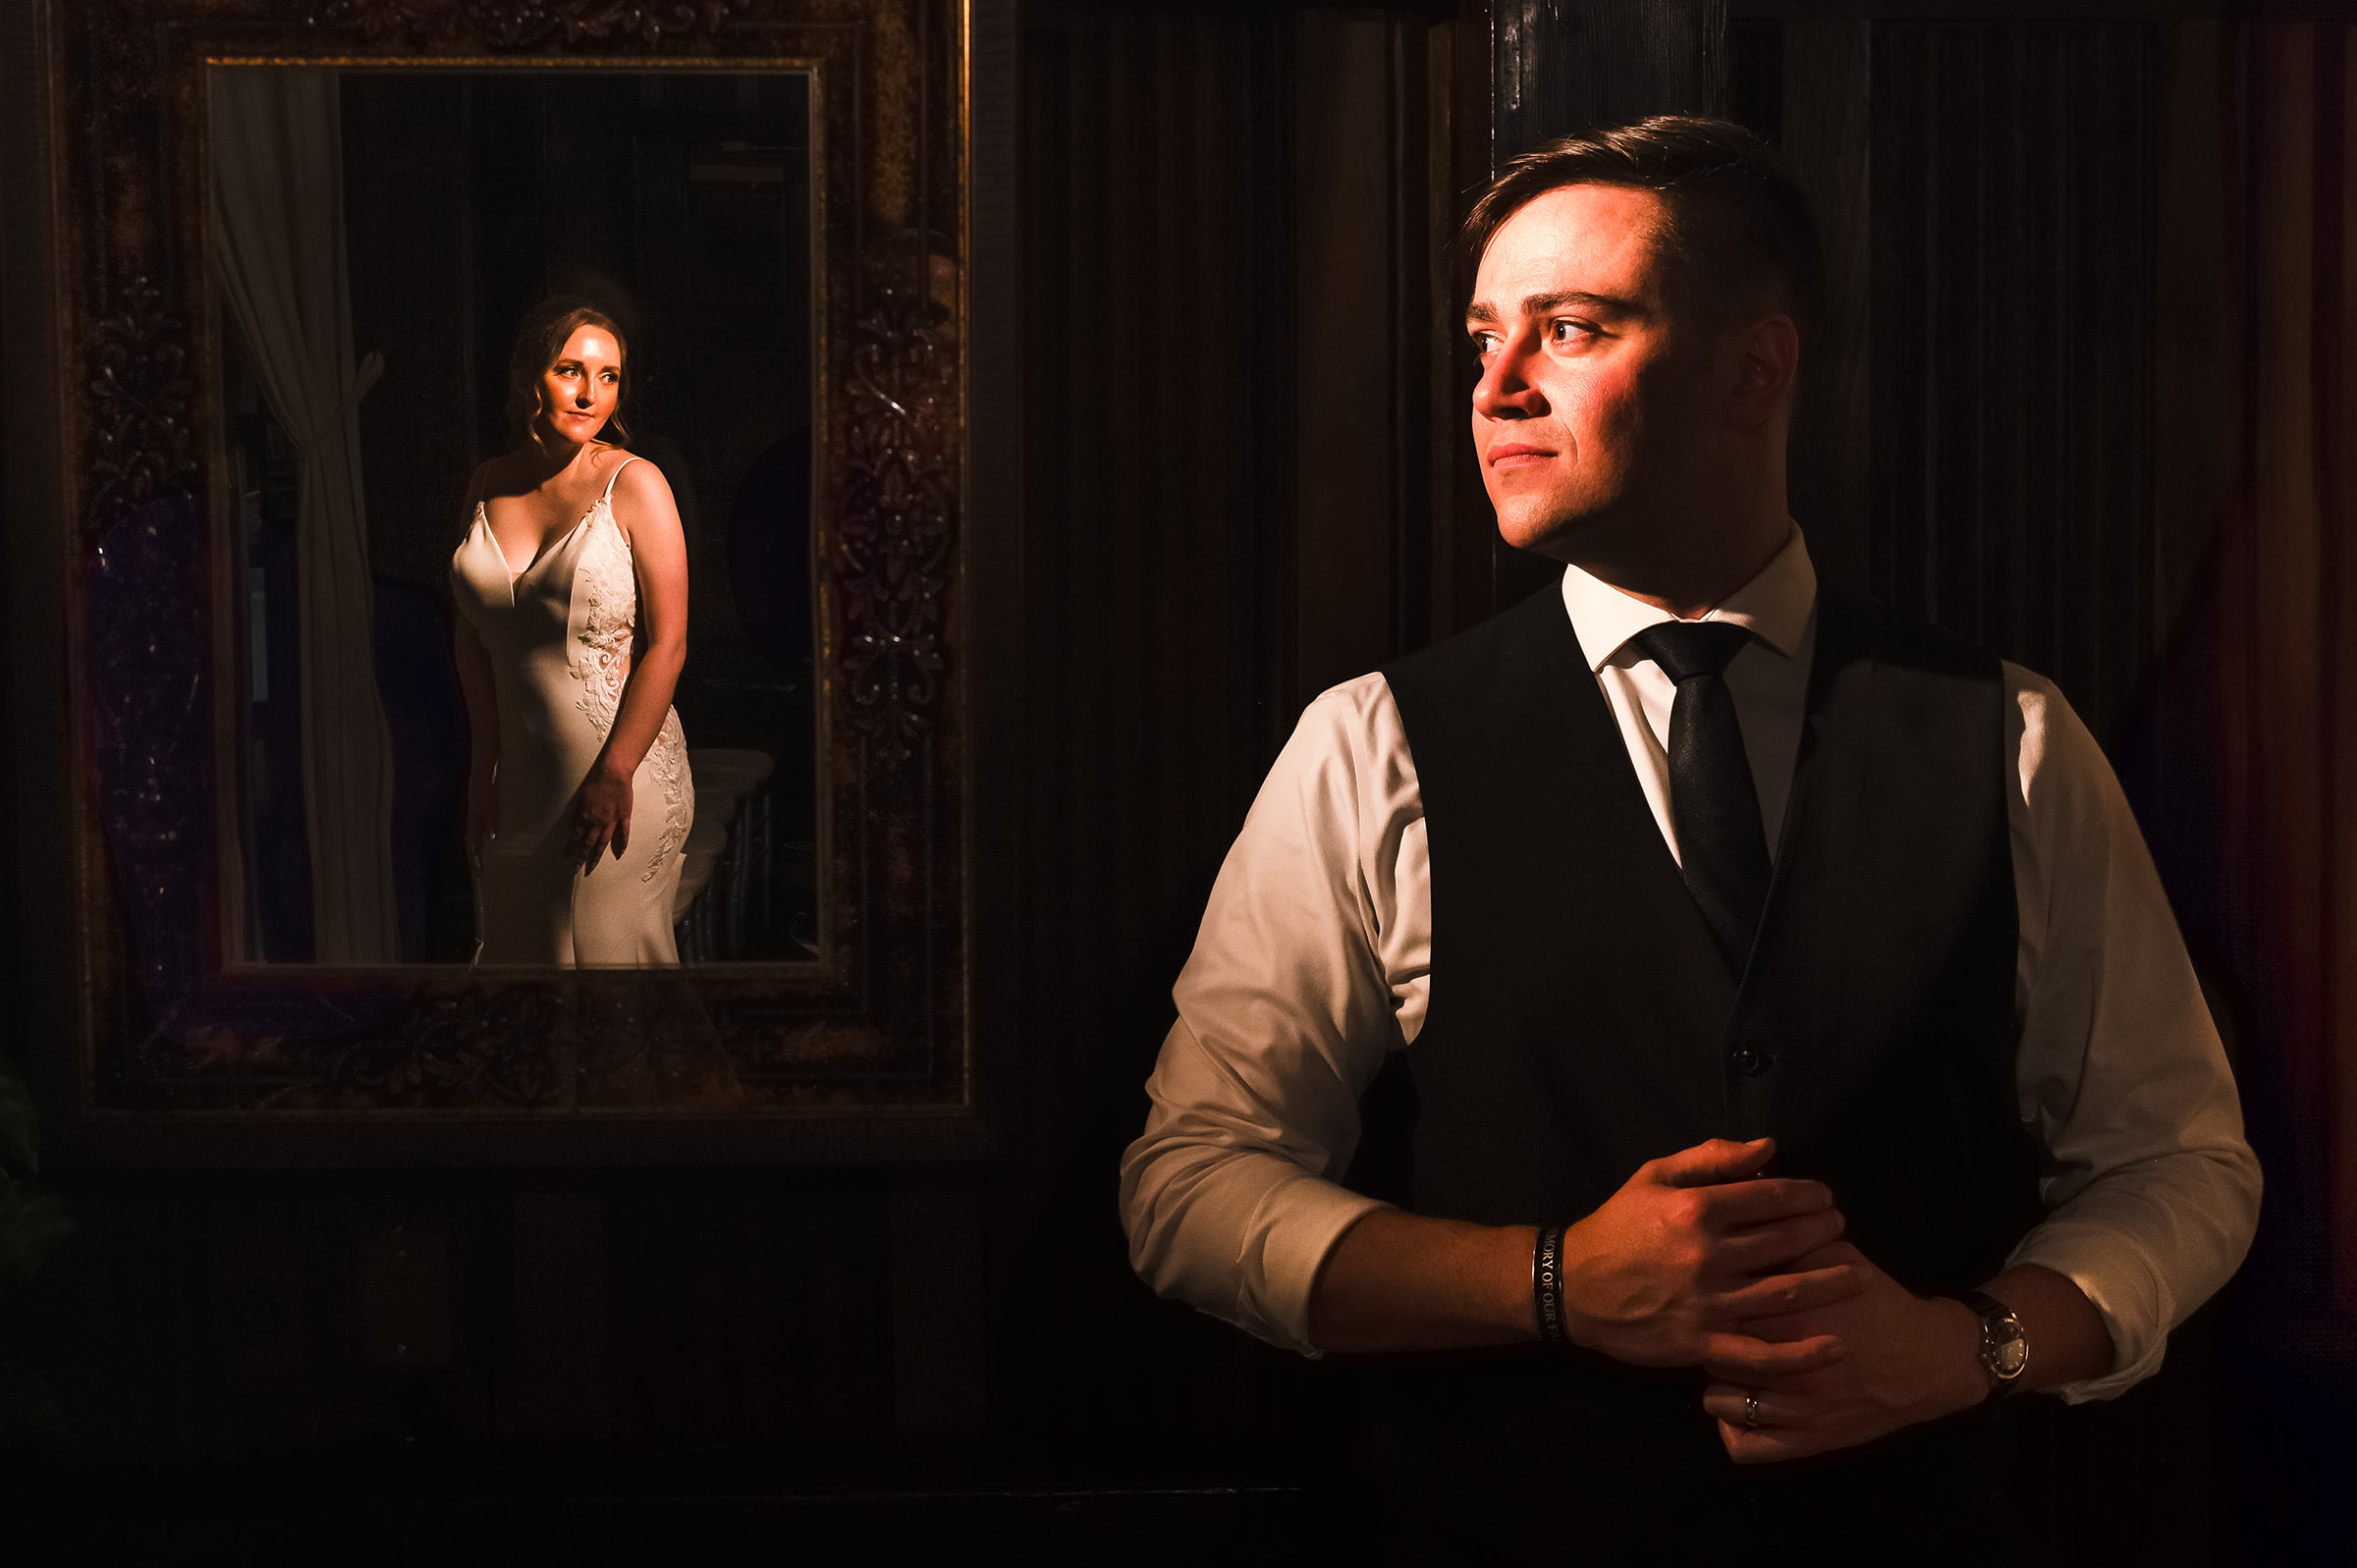 Wellshire event center dramatic epic wedding couple portrait Bride in mirror with groom looking at her dark and moody